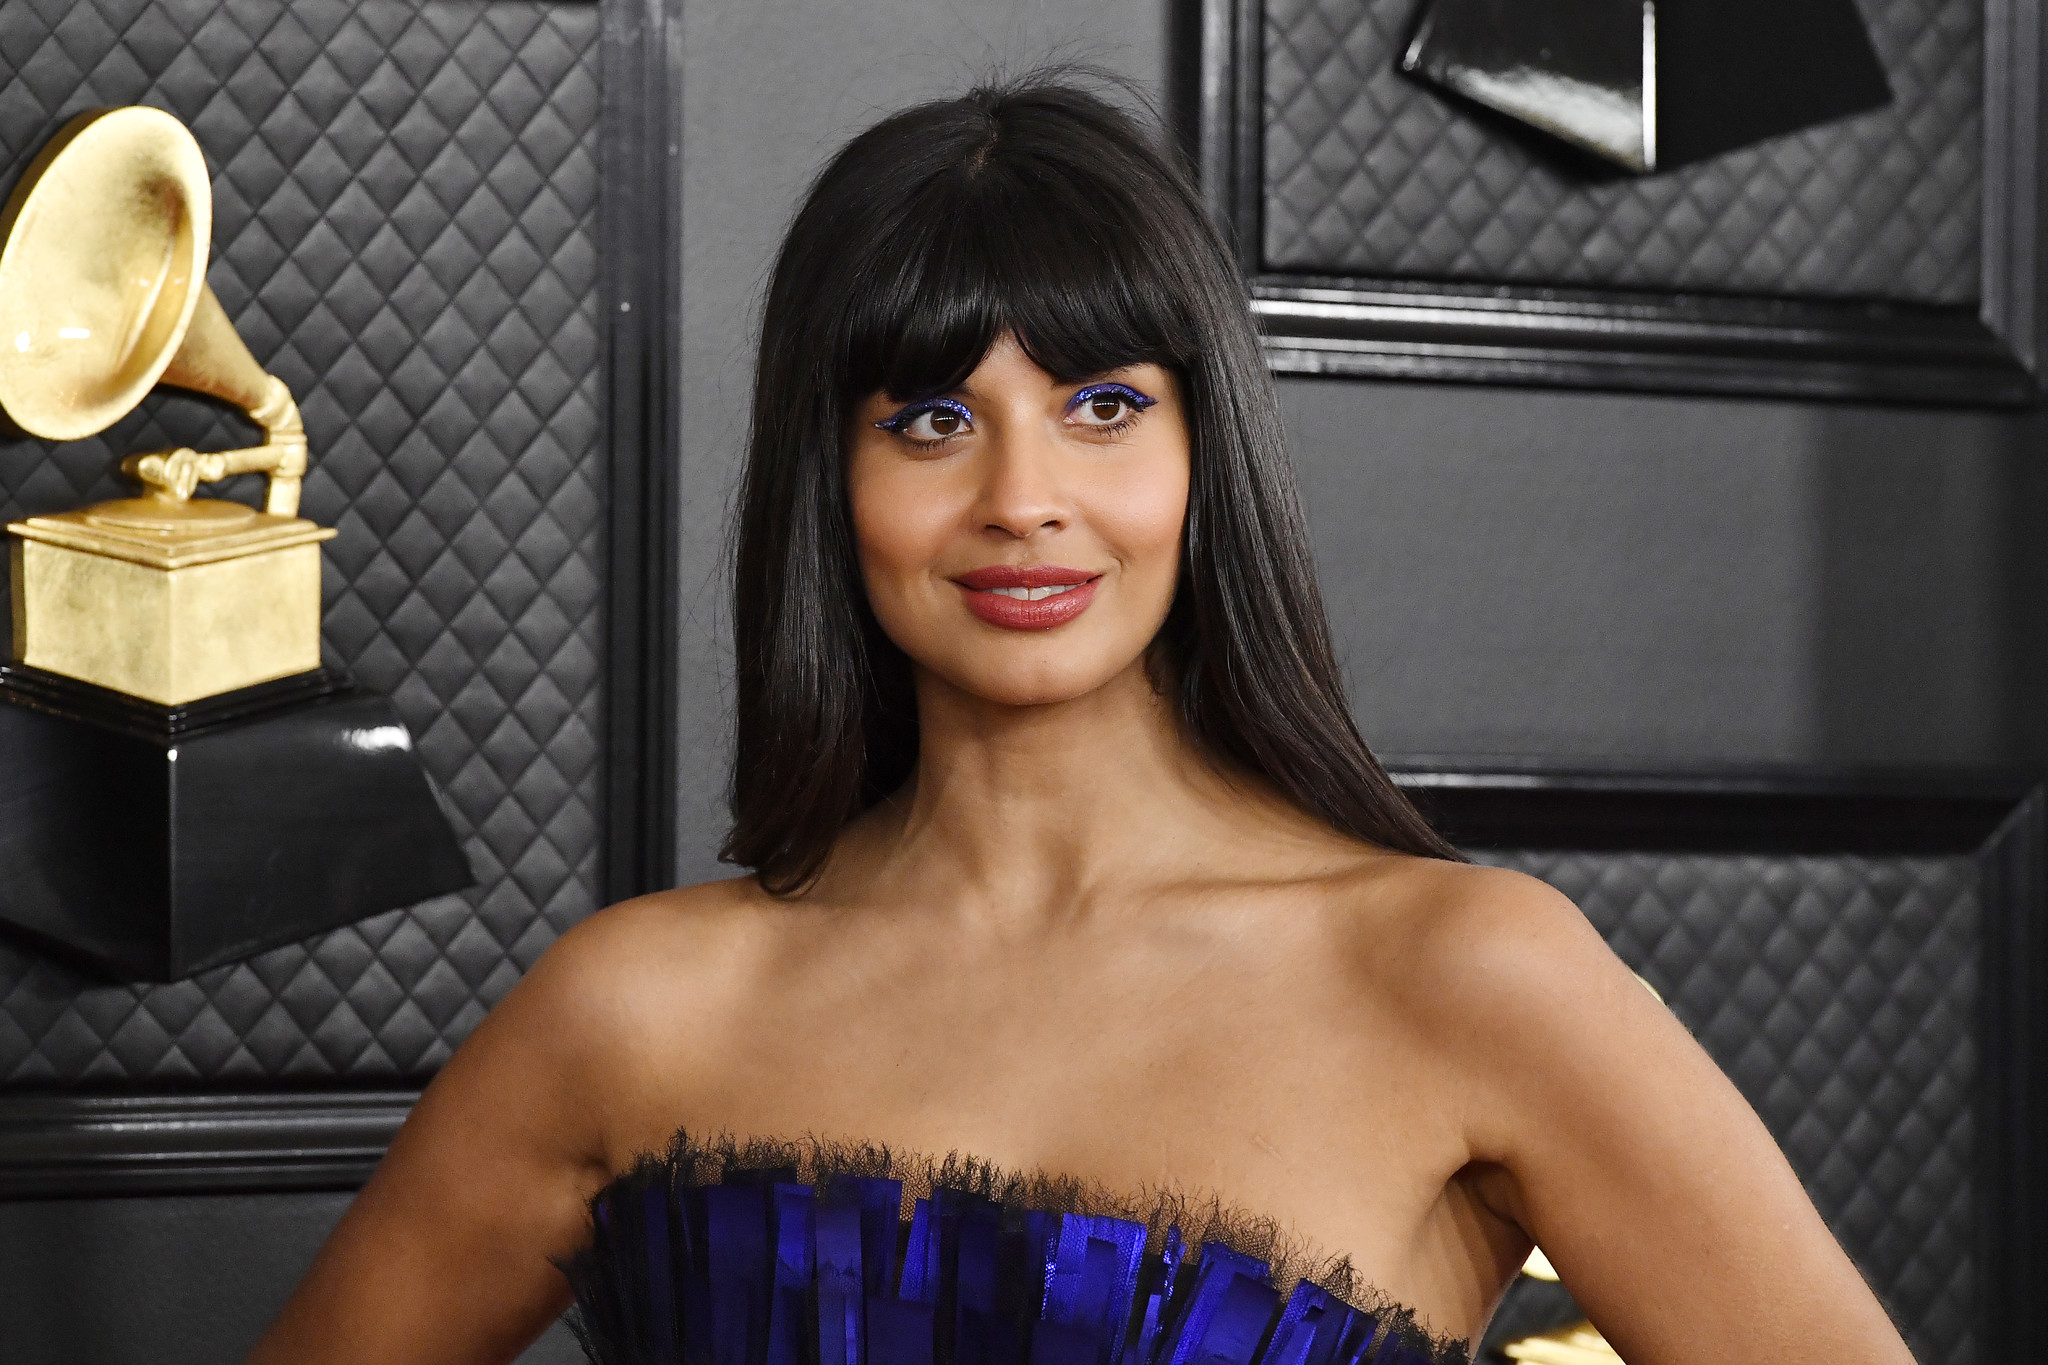 Jameela Jamil reveals she hasn’t worn pants to any of her video conference meetings during quarantine